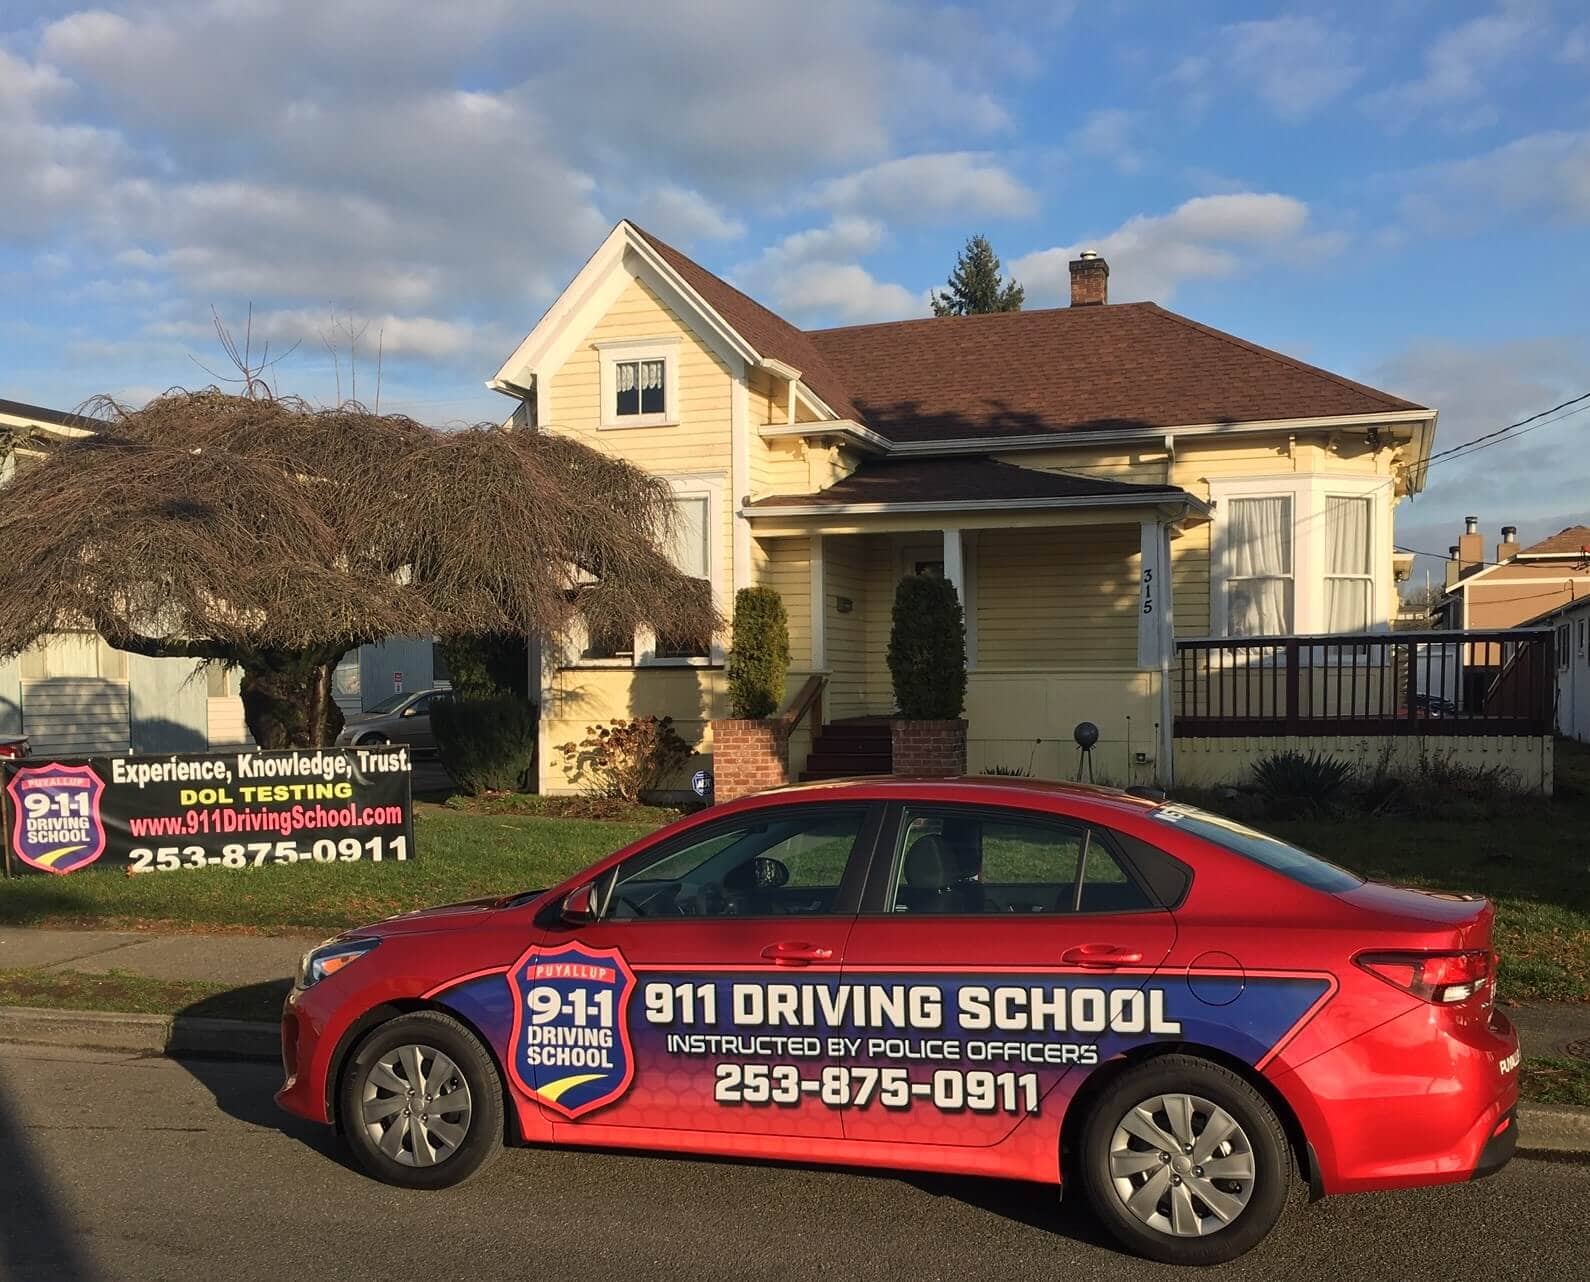 911 Driving School - Westminster, CO, US, driving school near me